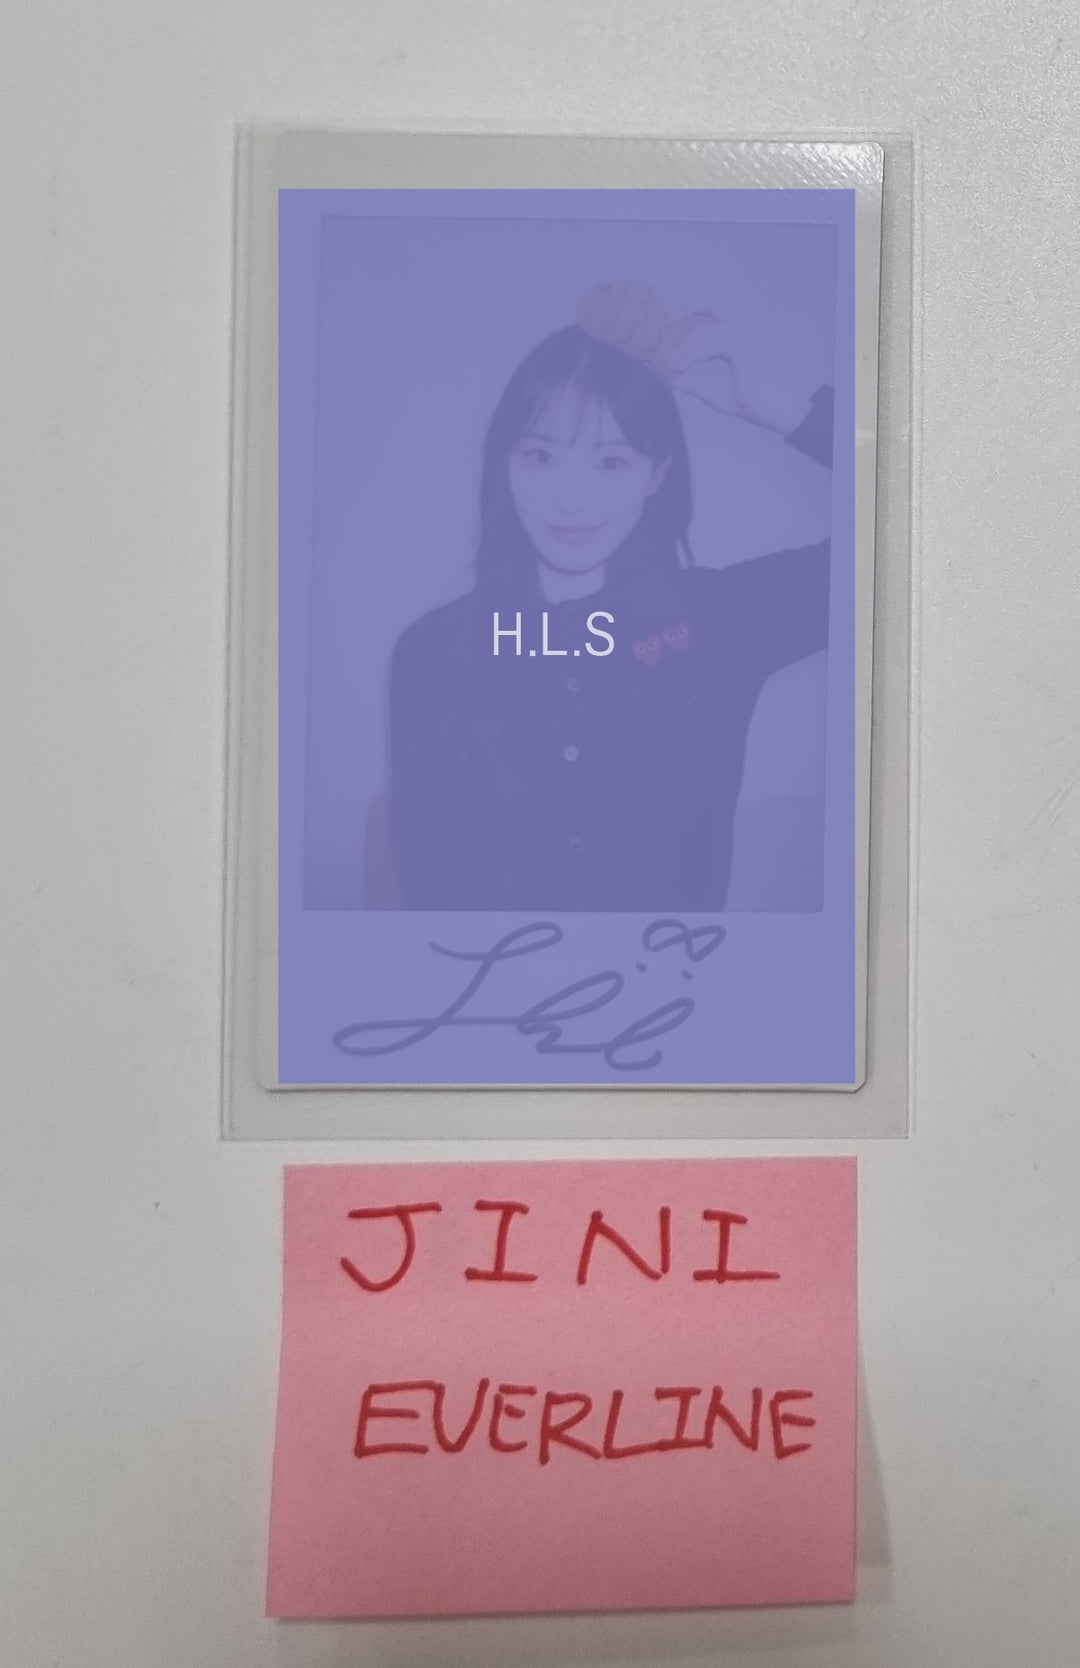 JINI "An Iron Hand In A Velvet Glove" - Hand Autographed(Signed) Polaroid [24.1.11]